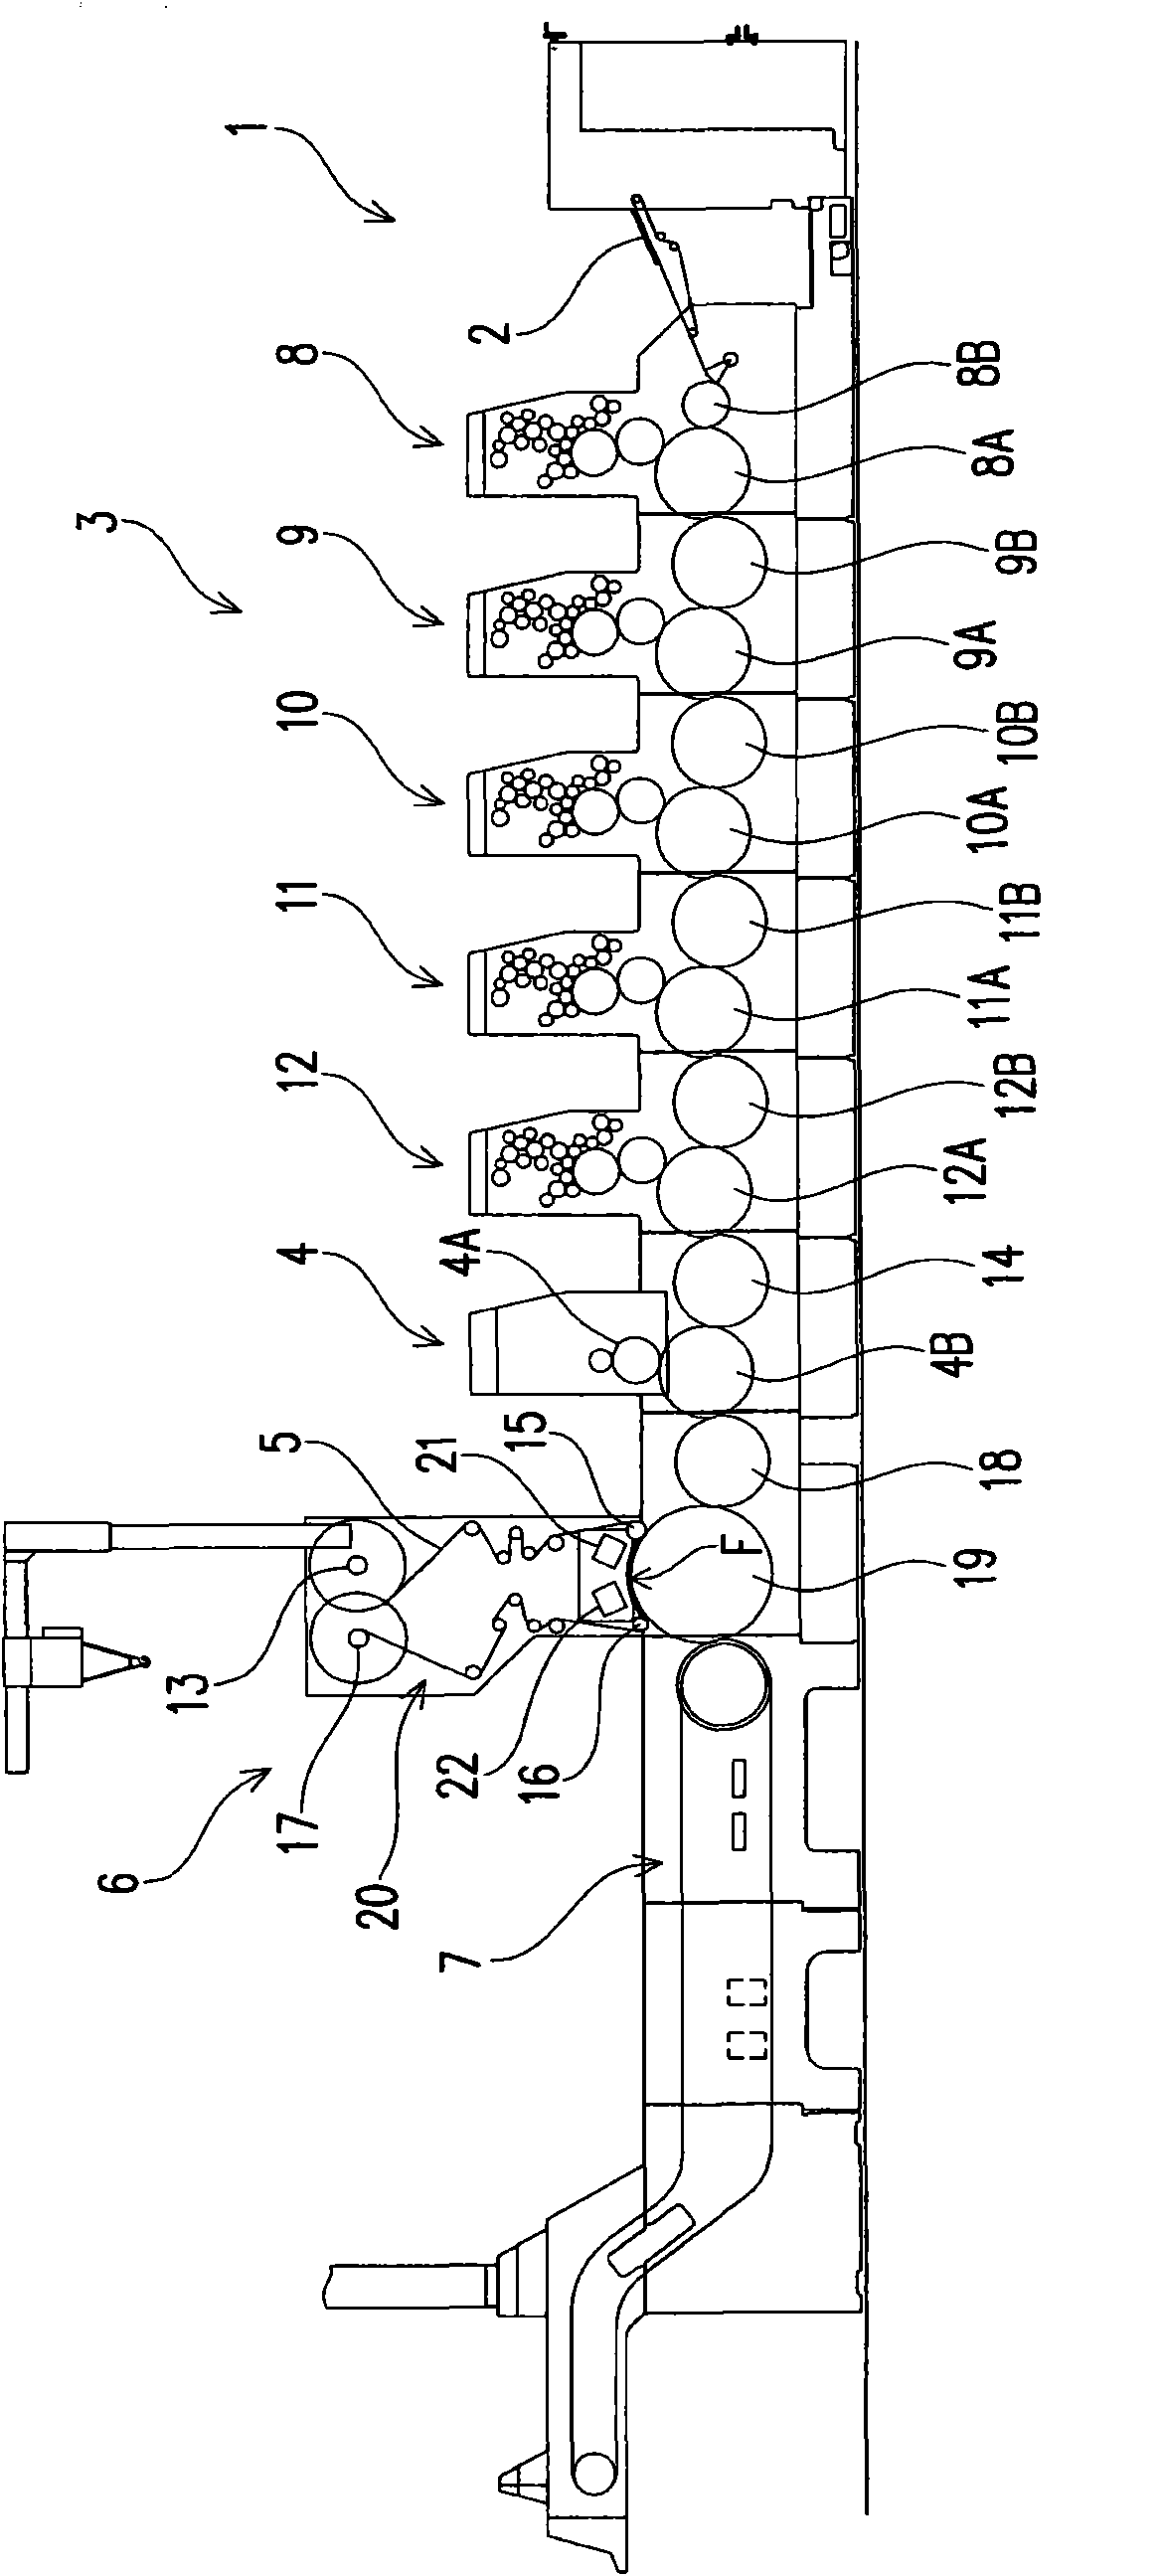 Transfer device and transfer method for printed sheets of paper